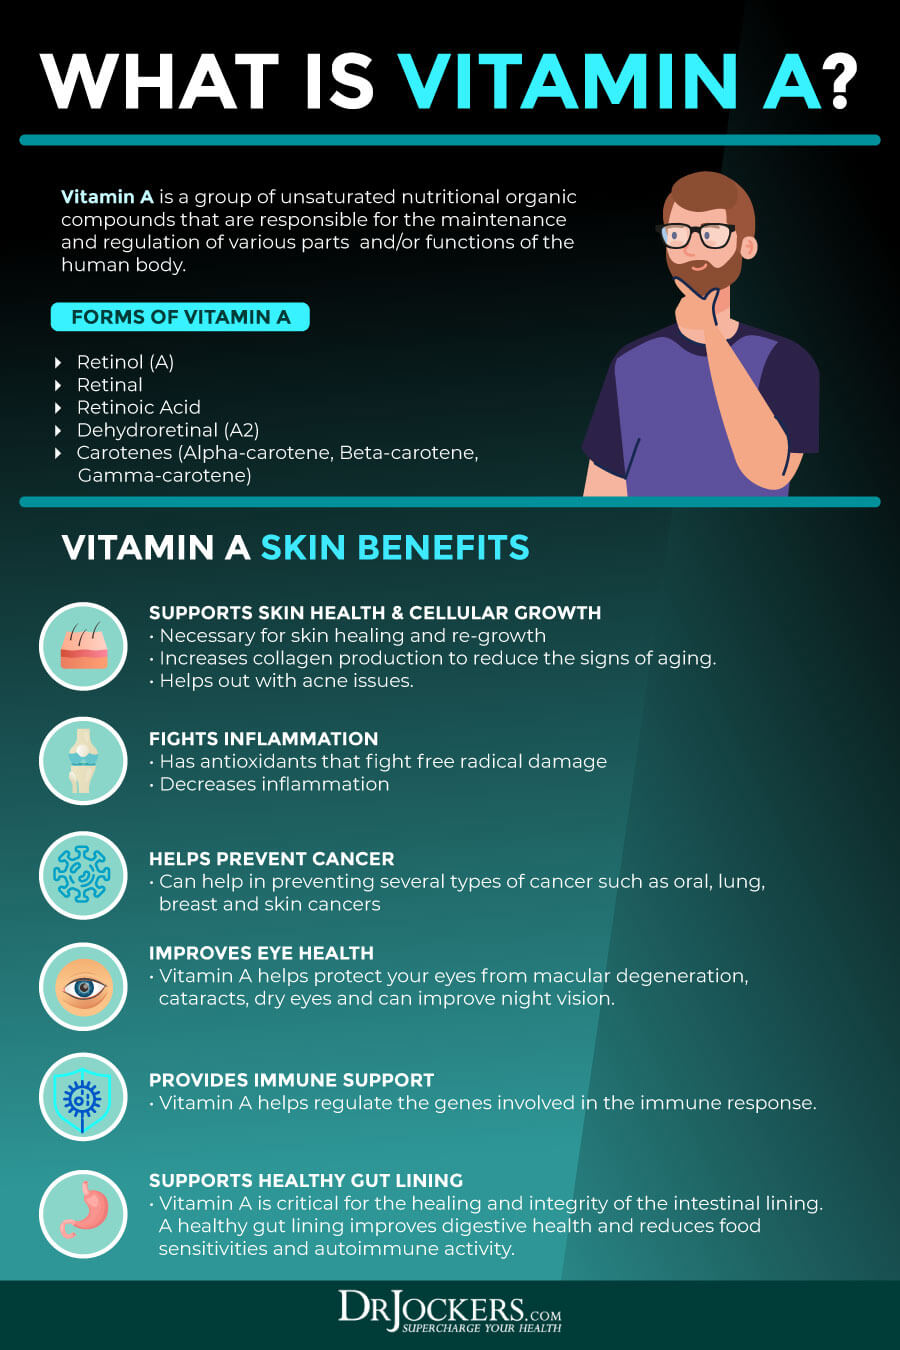 skin inflammation, Skin Inflammation: Symptoms, Causes, and Support Strategies